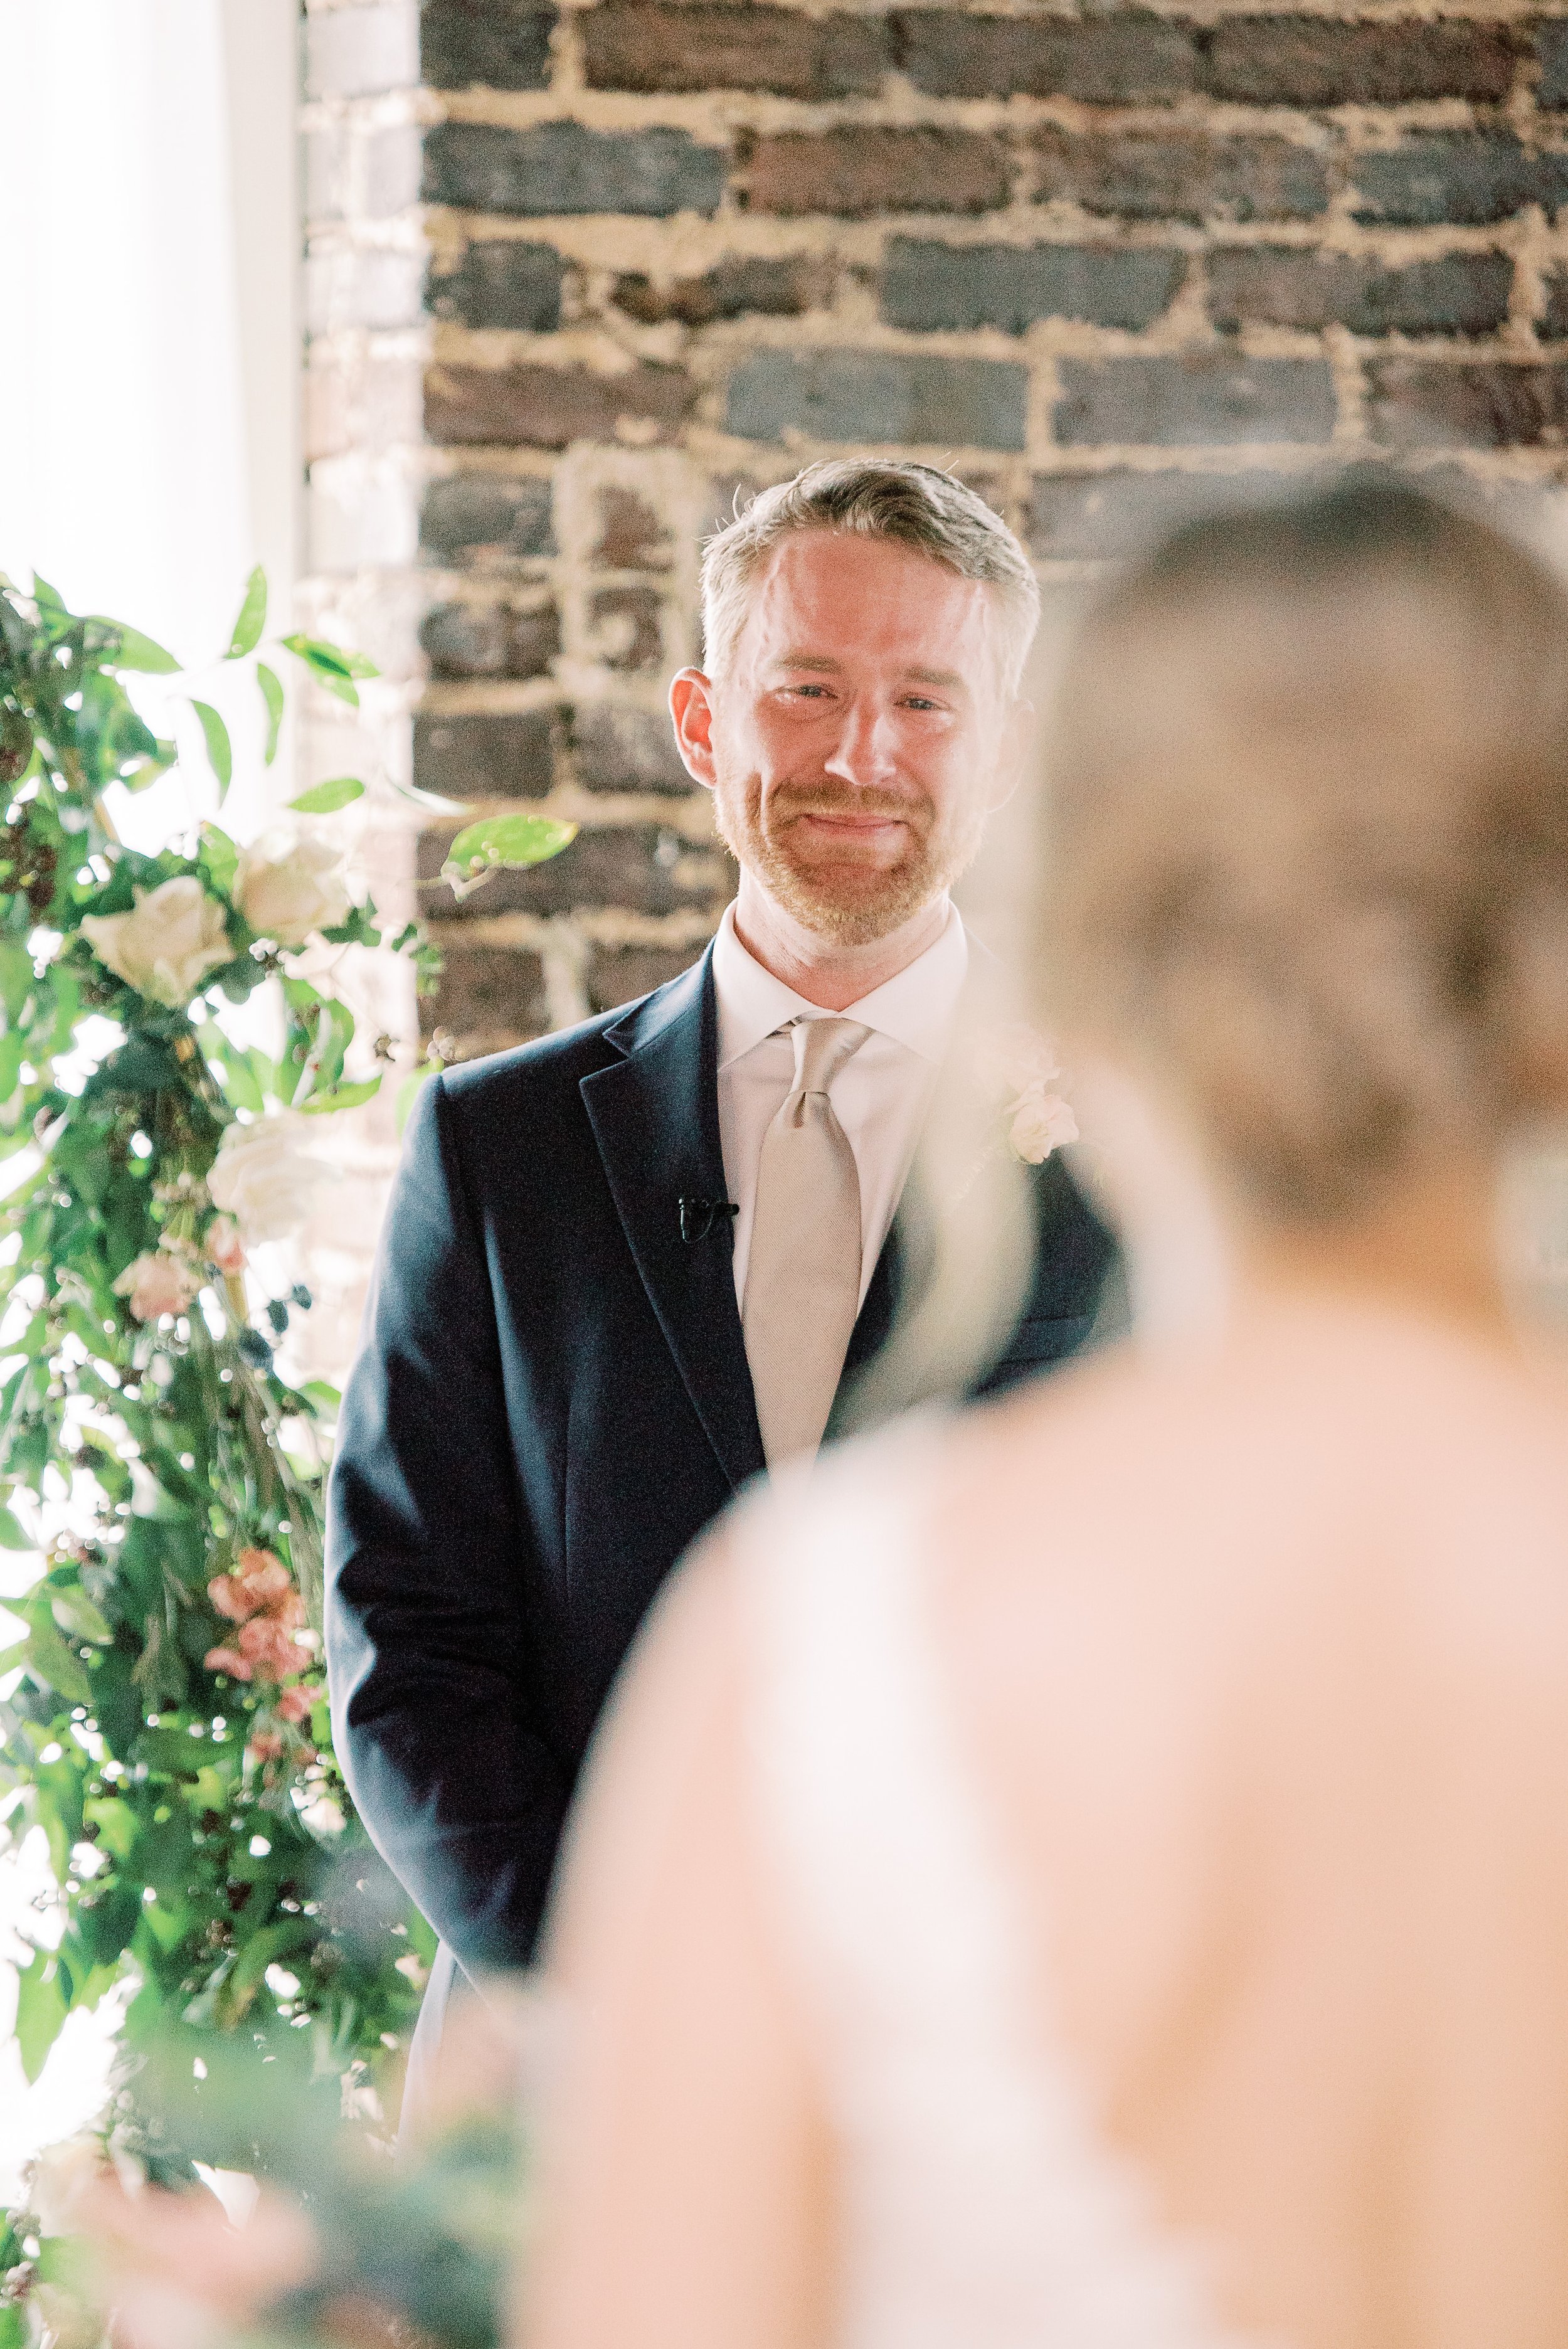  Details from Bustle Bride, Emily and Jeffrey Criswell’s wedding in Birmingham, Alabama. 